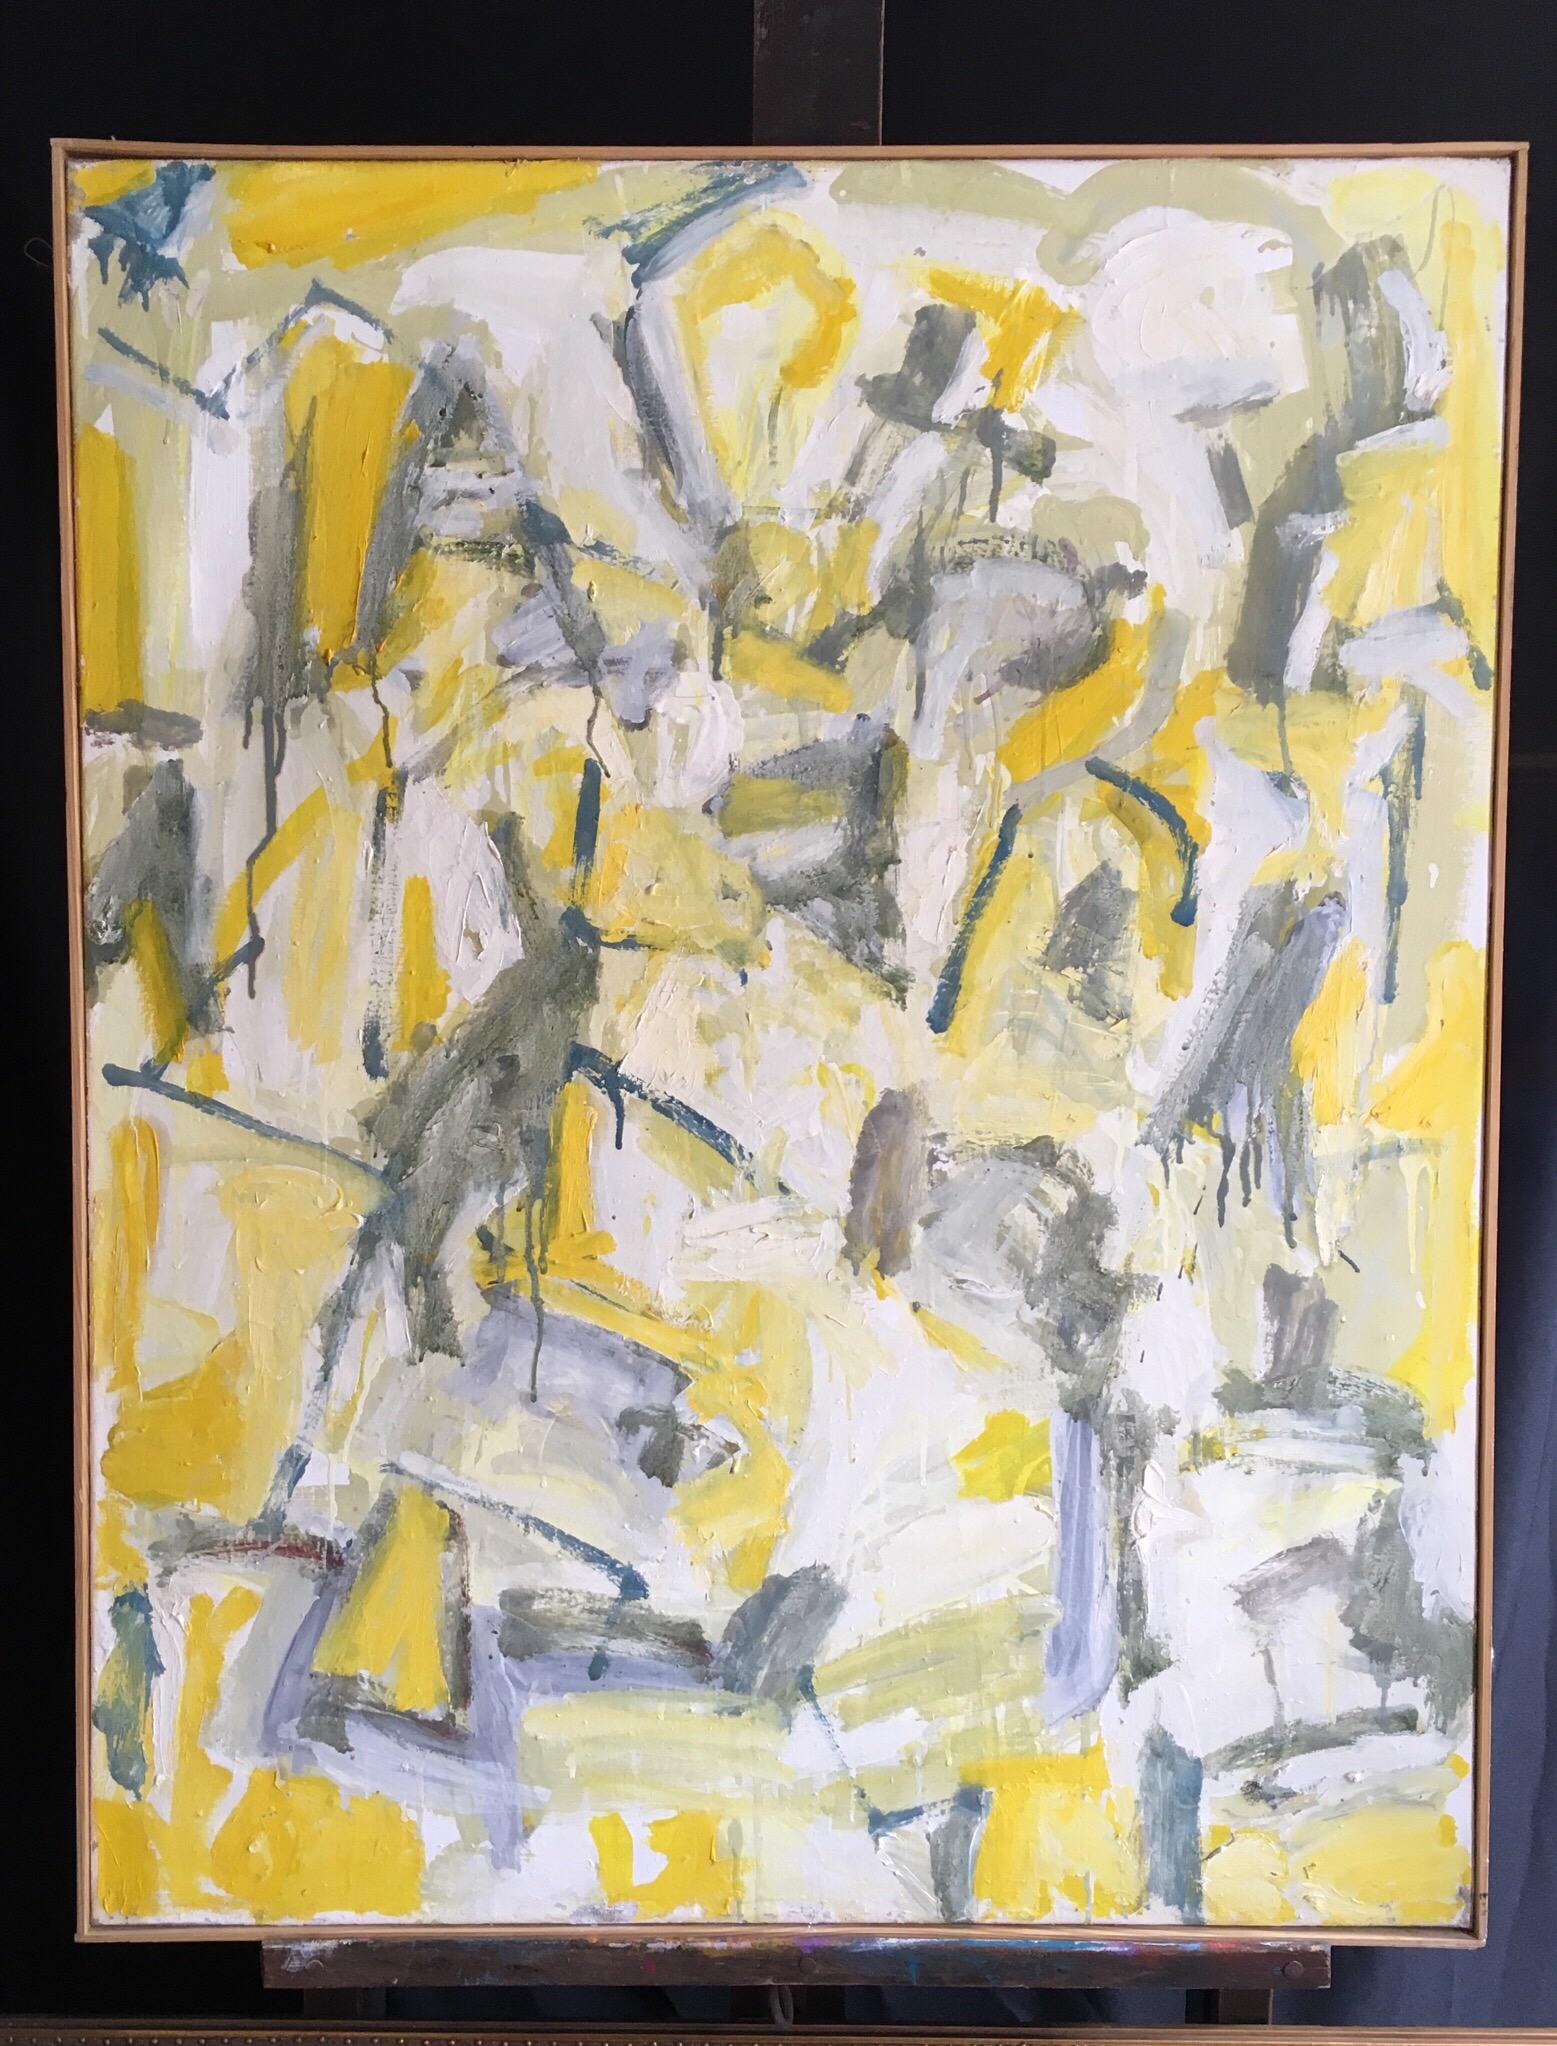 Yellow and Grey Abstract Huge Oil Painting on Canvas Cubist Expressionist work - Gray Interior Painting by Unknown